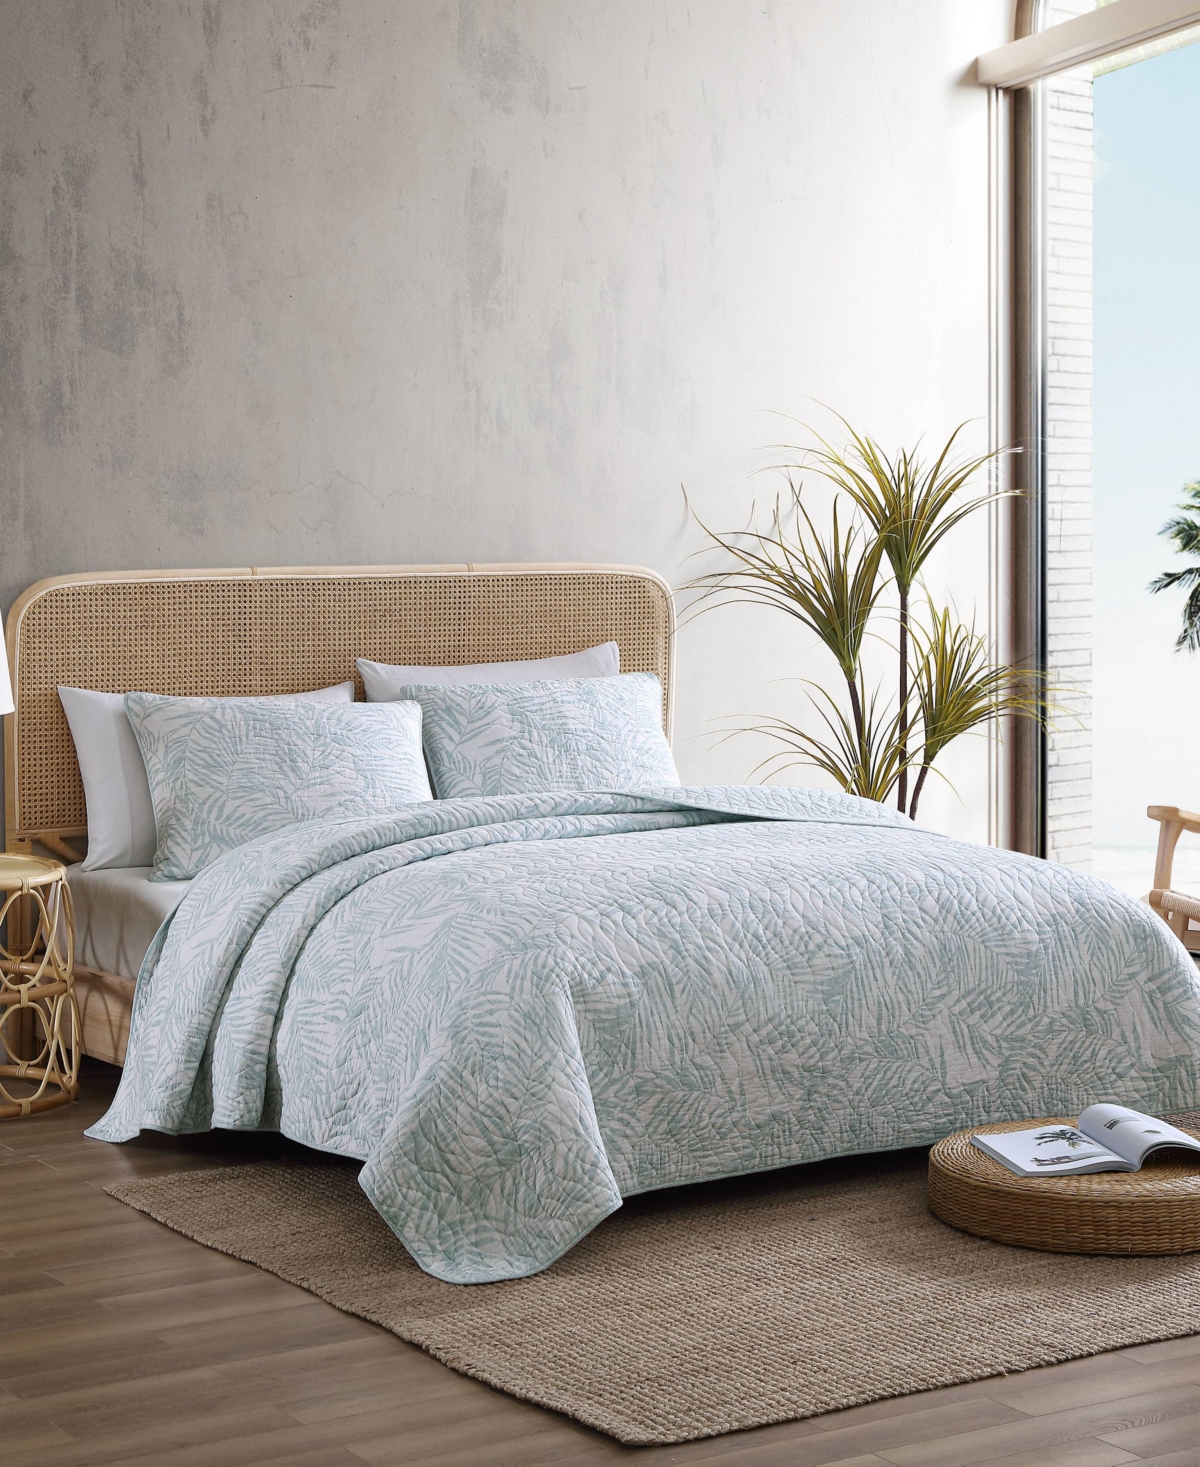 TOMMY BAHAMA HOME TOMMY BAHAMA PALMDAY COTTON REVERSIBLE 3 PIECE QUILT SET, FULL/QUEEN BEDDING